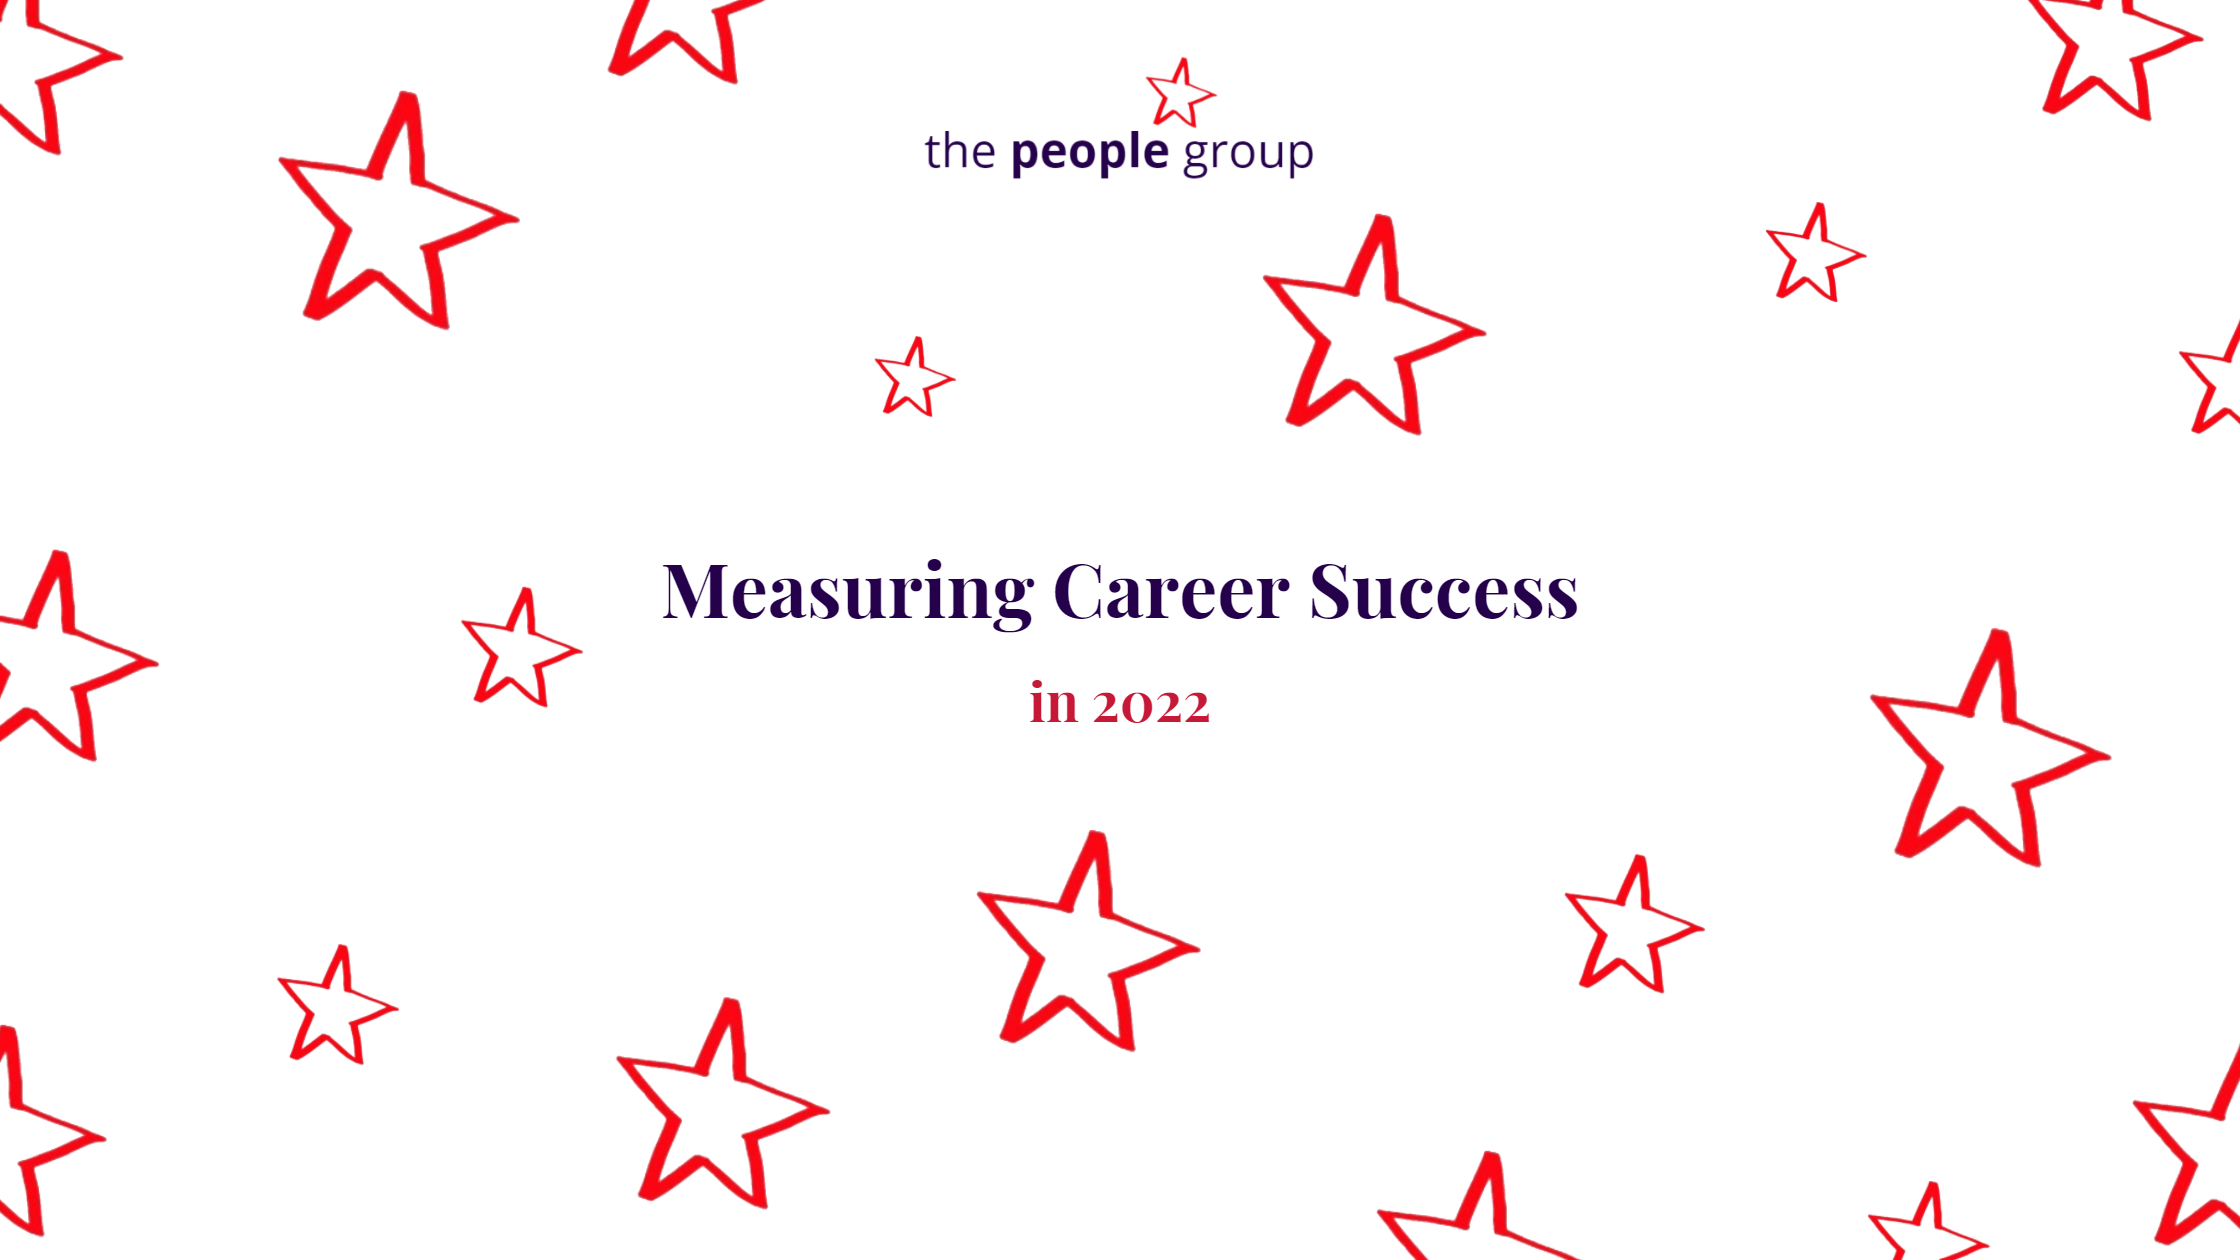 How Employees are Measuring Career Success in 2022